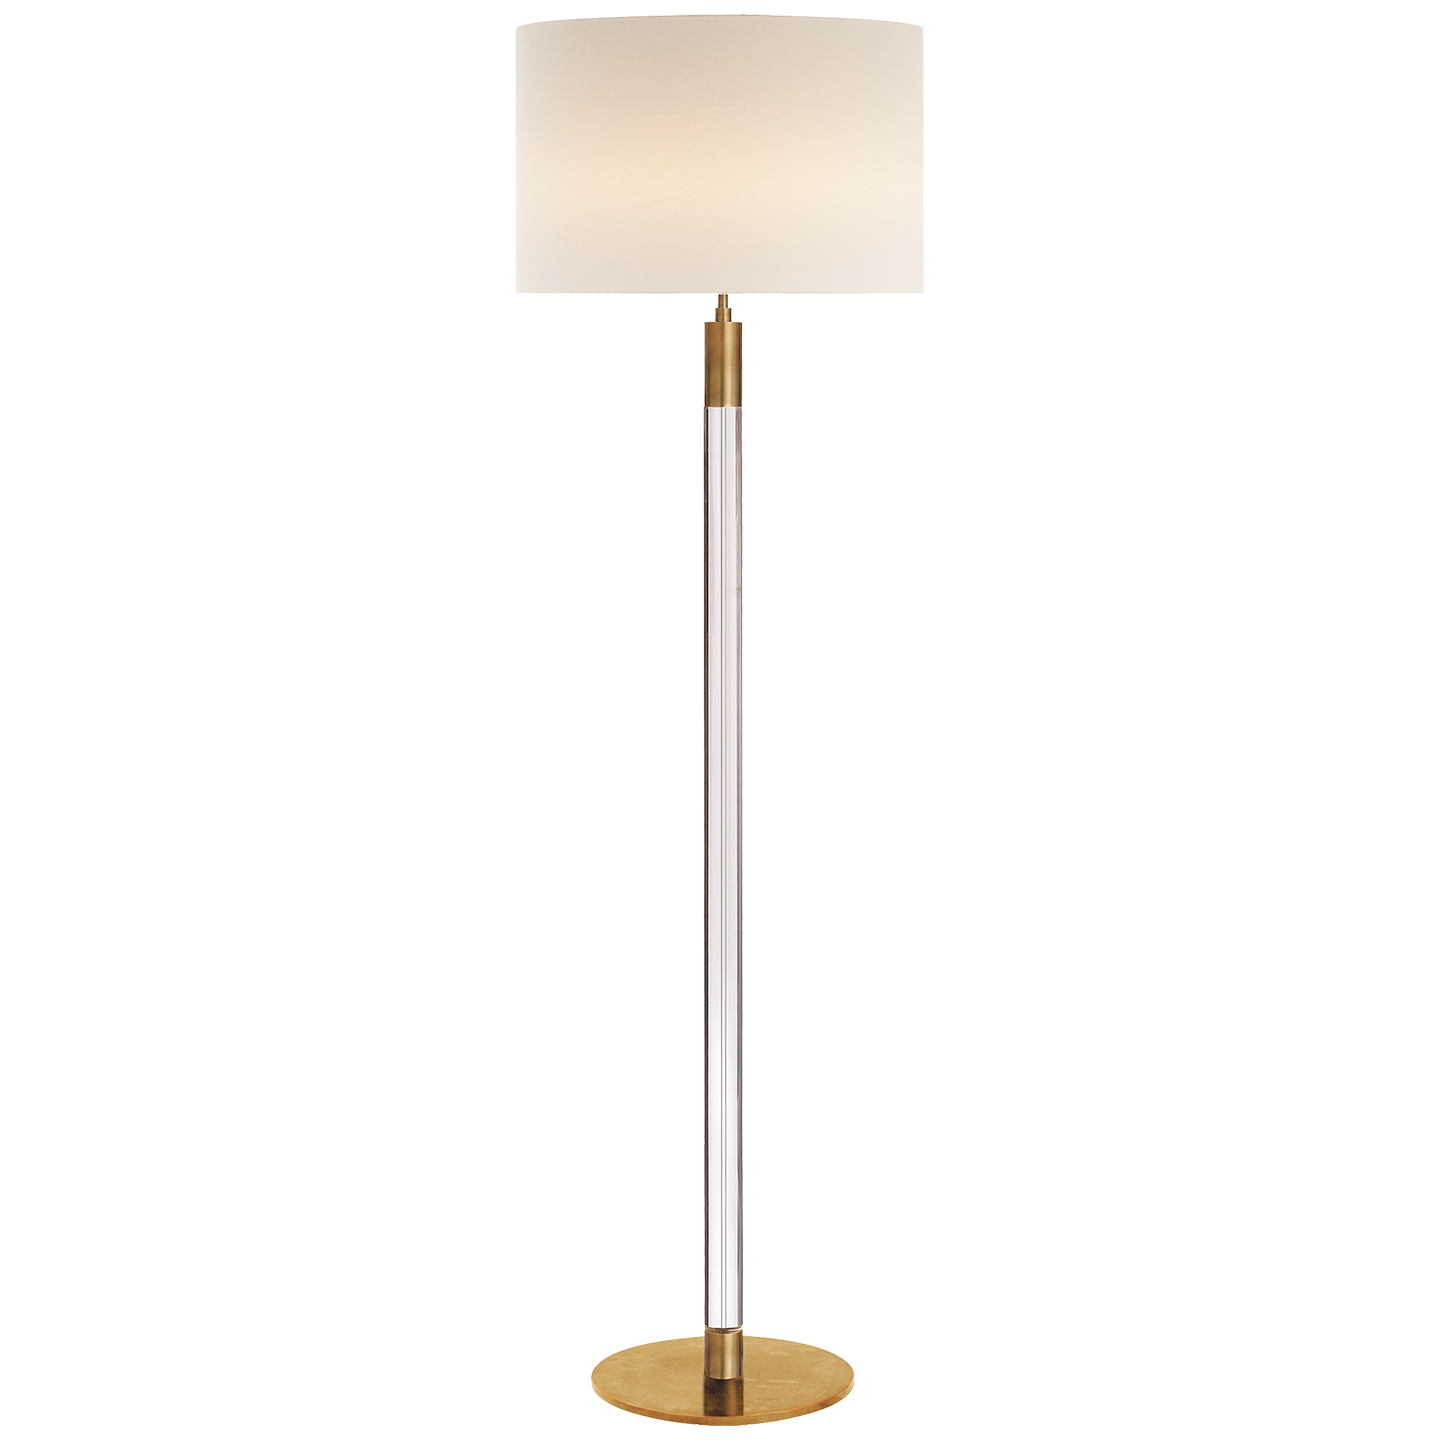 Load image into Gallery viewer, Riga Floor Lamp in Hand-Rubbed Antique Brass and Clear Glass with Linen Shade
